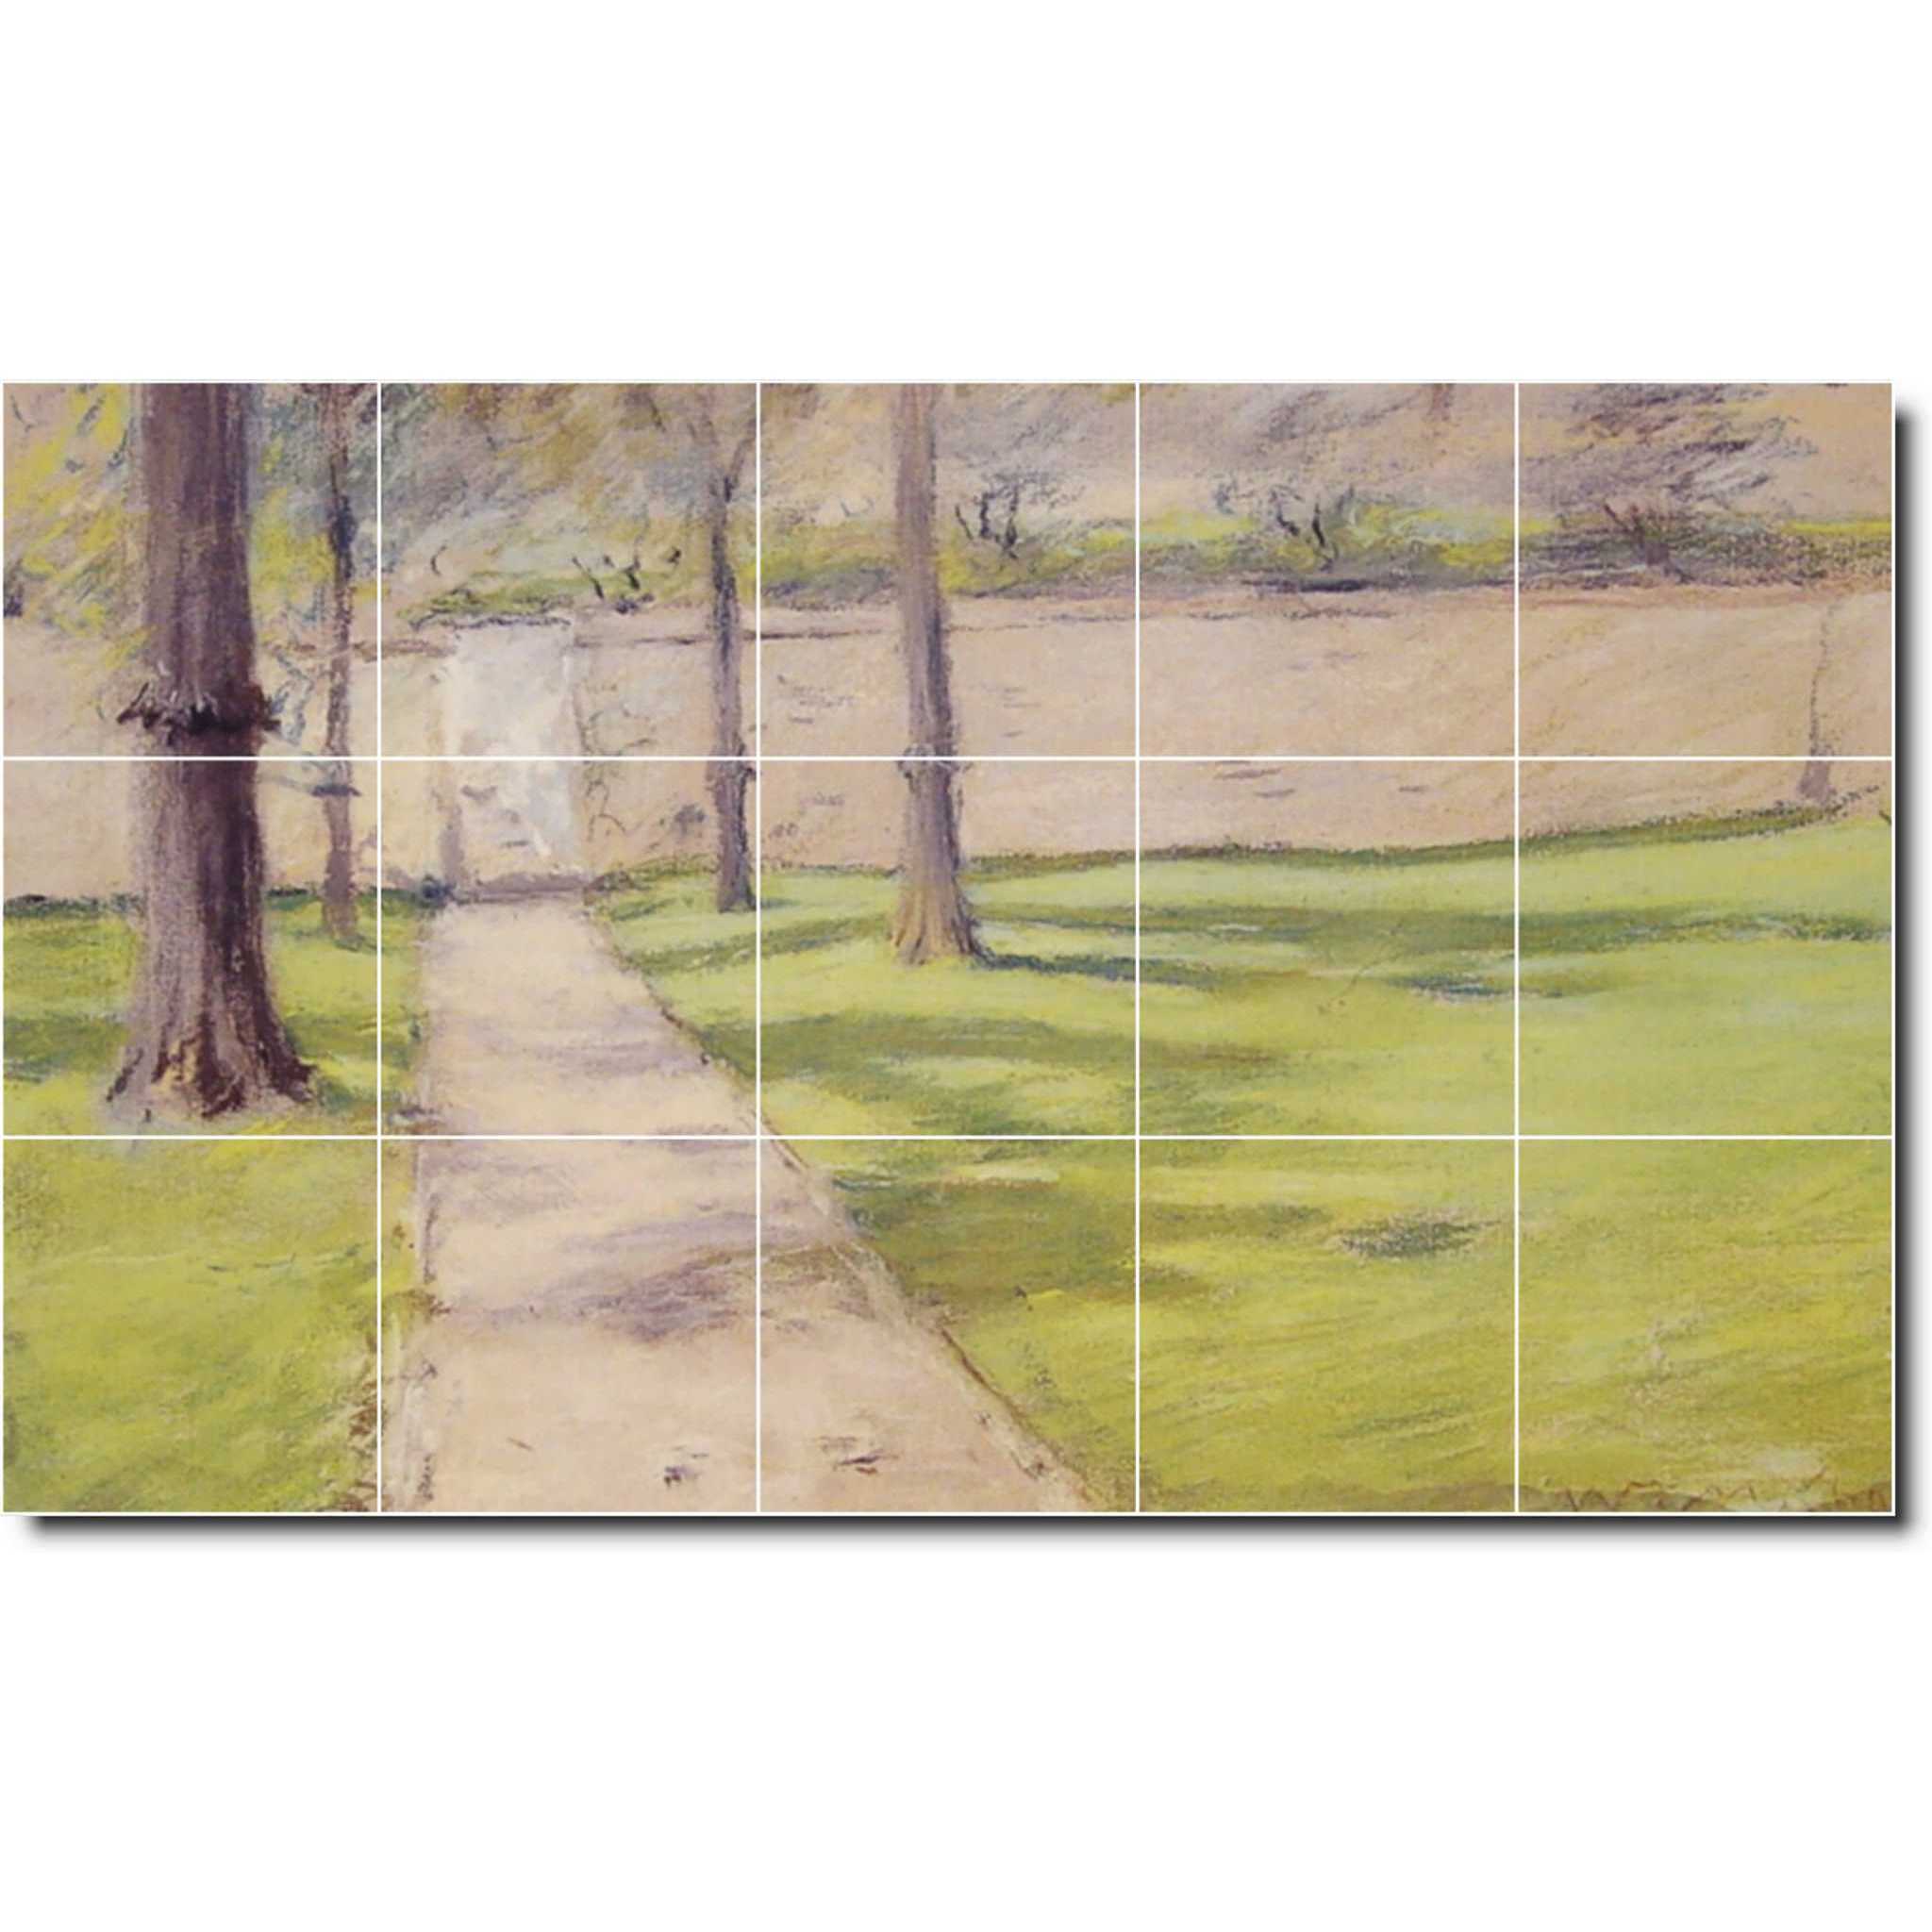 william chase country painting ceramic tile mural p01668